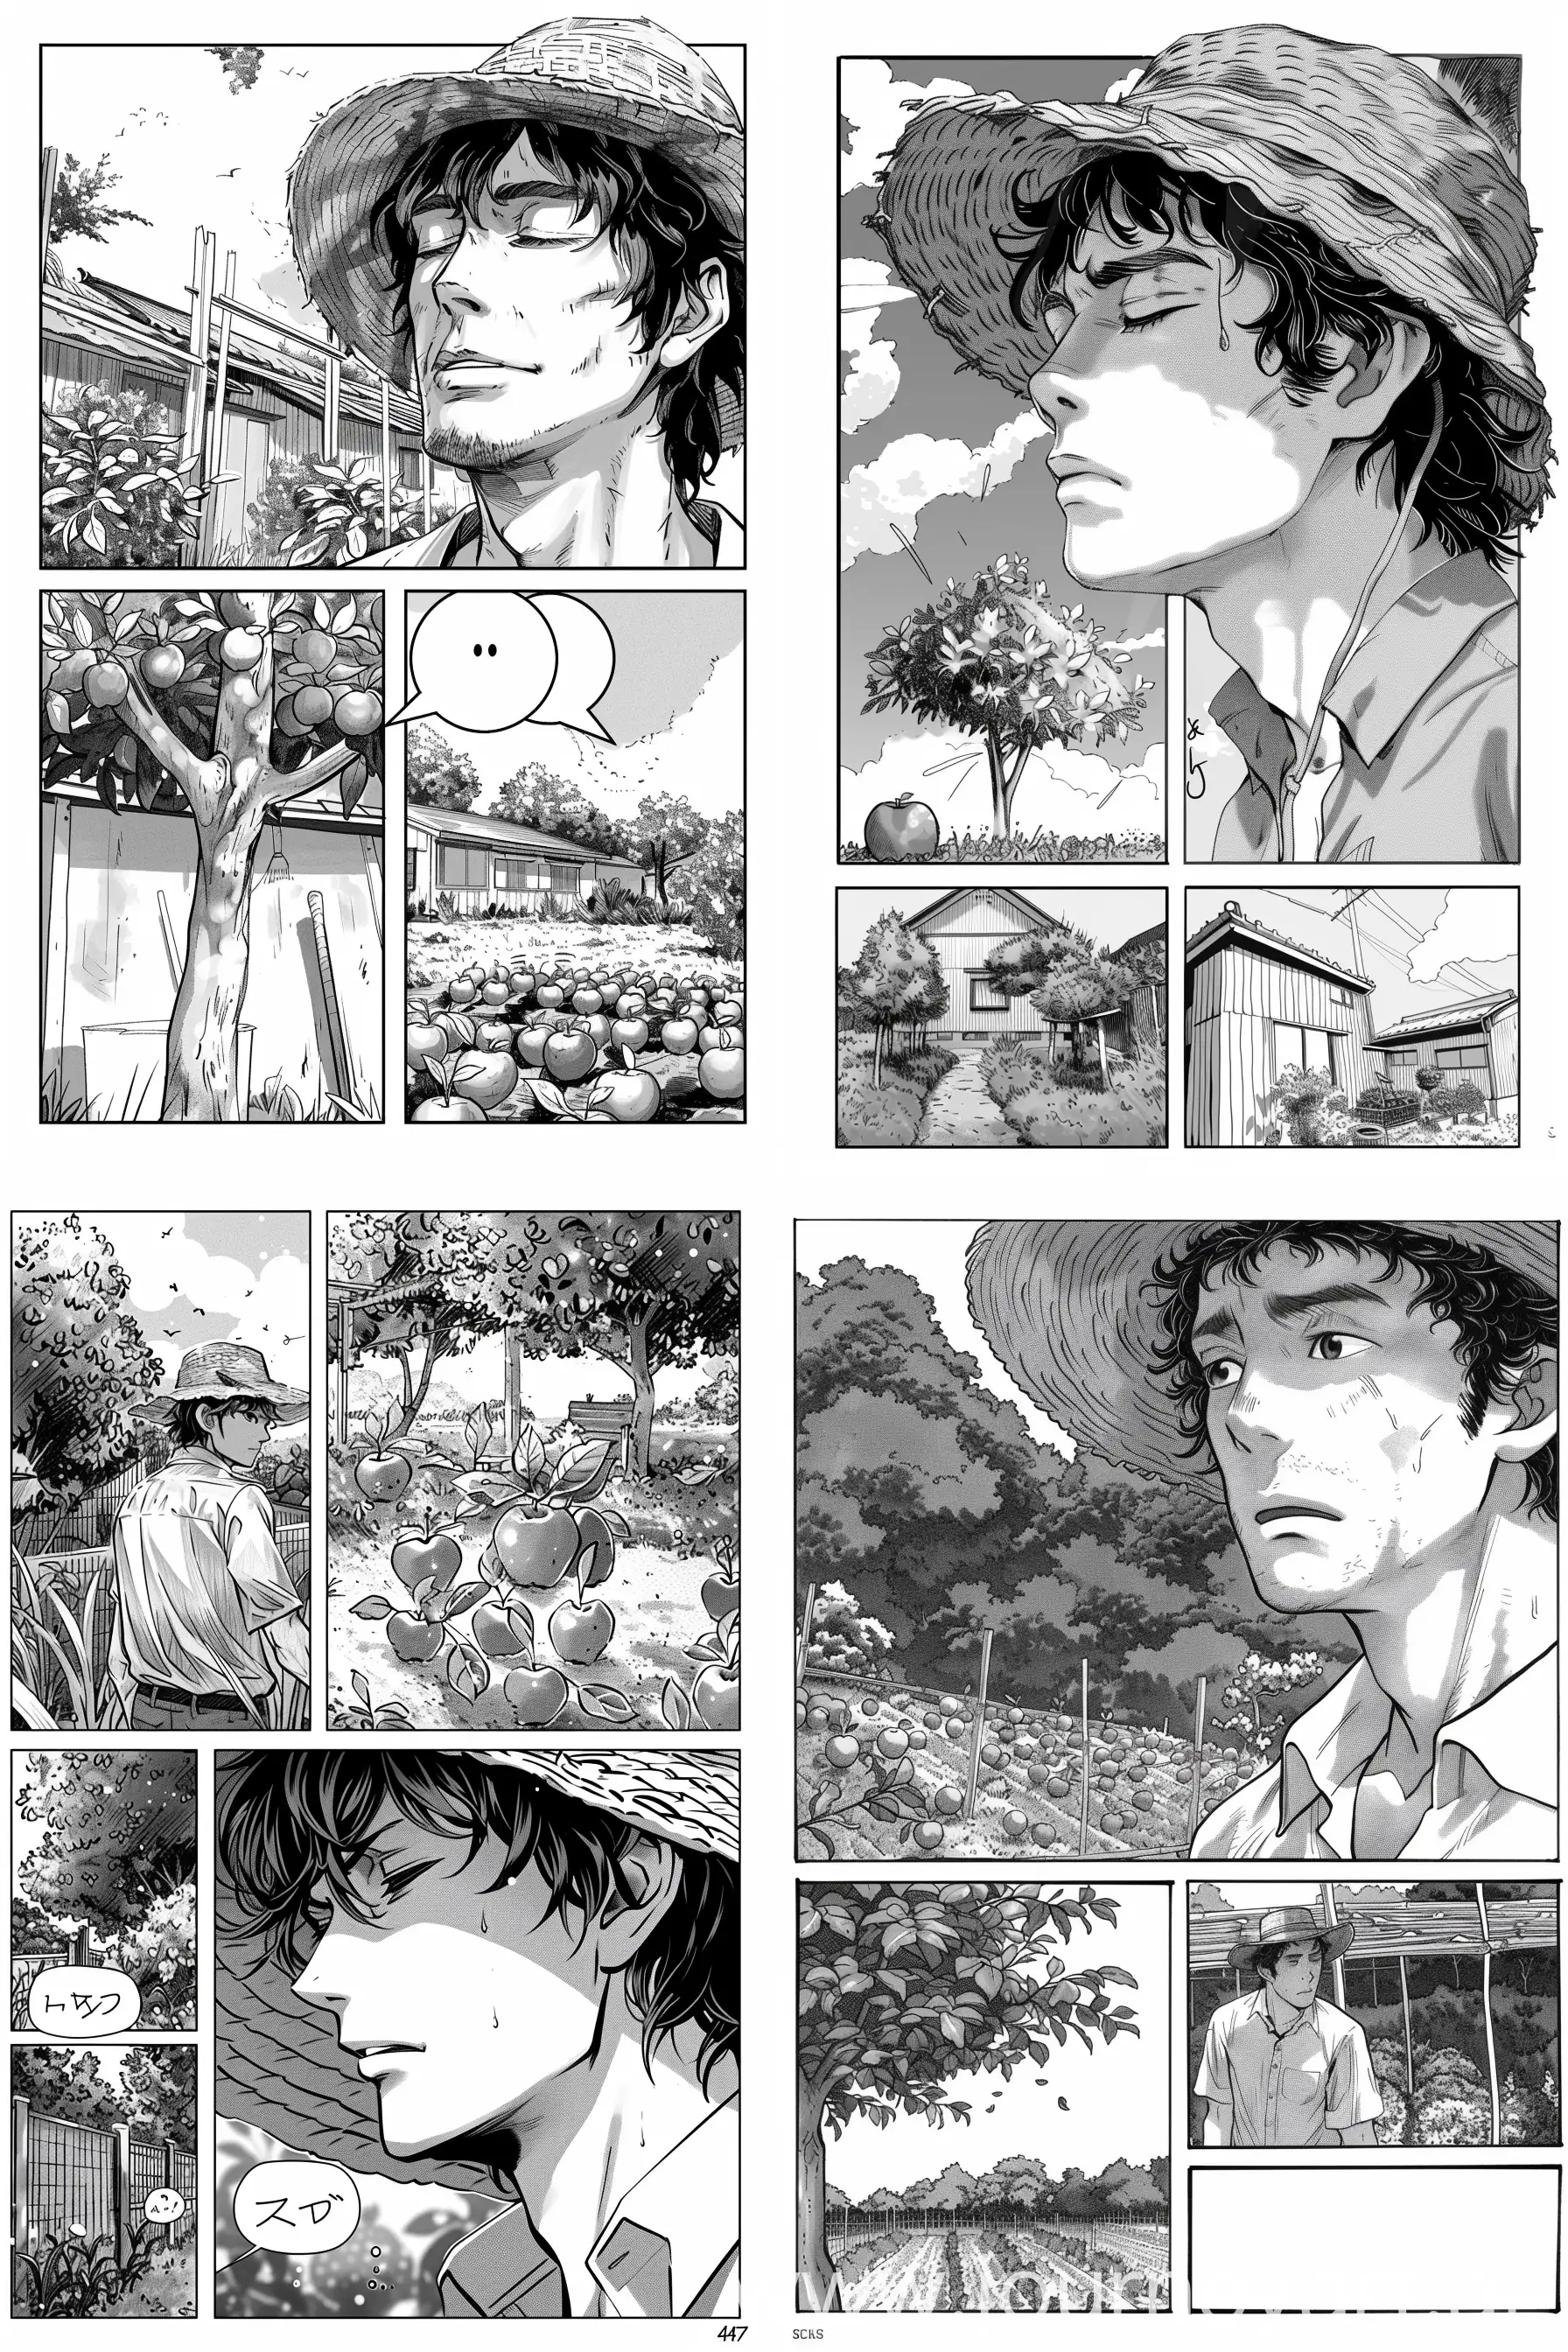 Manga page with 4 or 5 pictures,manga style,black and white,a farmer akhura who was just thinking something by closing his eyes hears a noise a noise from his backyard garden,show case his garden with an apple tree also,character Detail:akhura (farmer) is 47 year old man who has dark, wavy hair that is visible under a textured straw hat,a small nose, and a defined jawline,normal eyes. --ar 2:3 